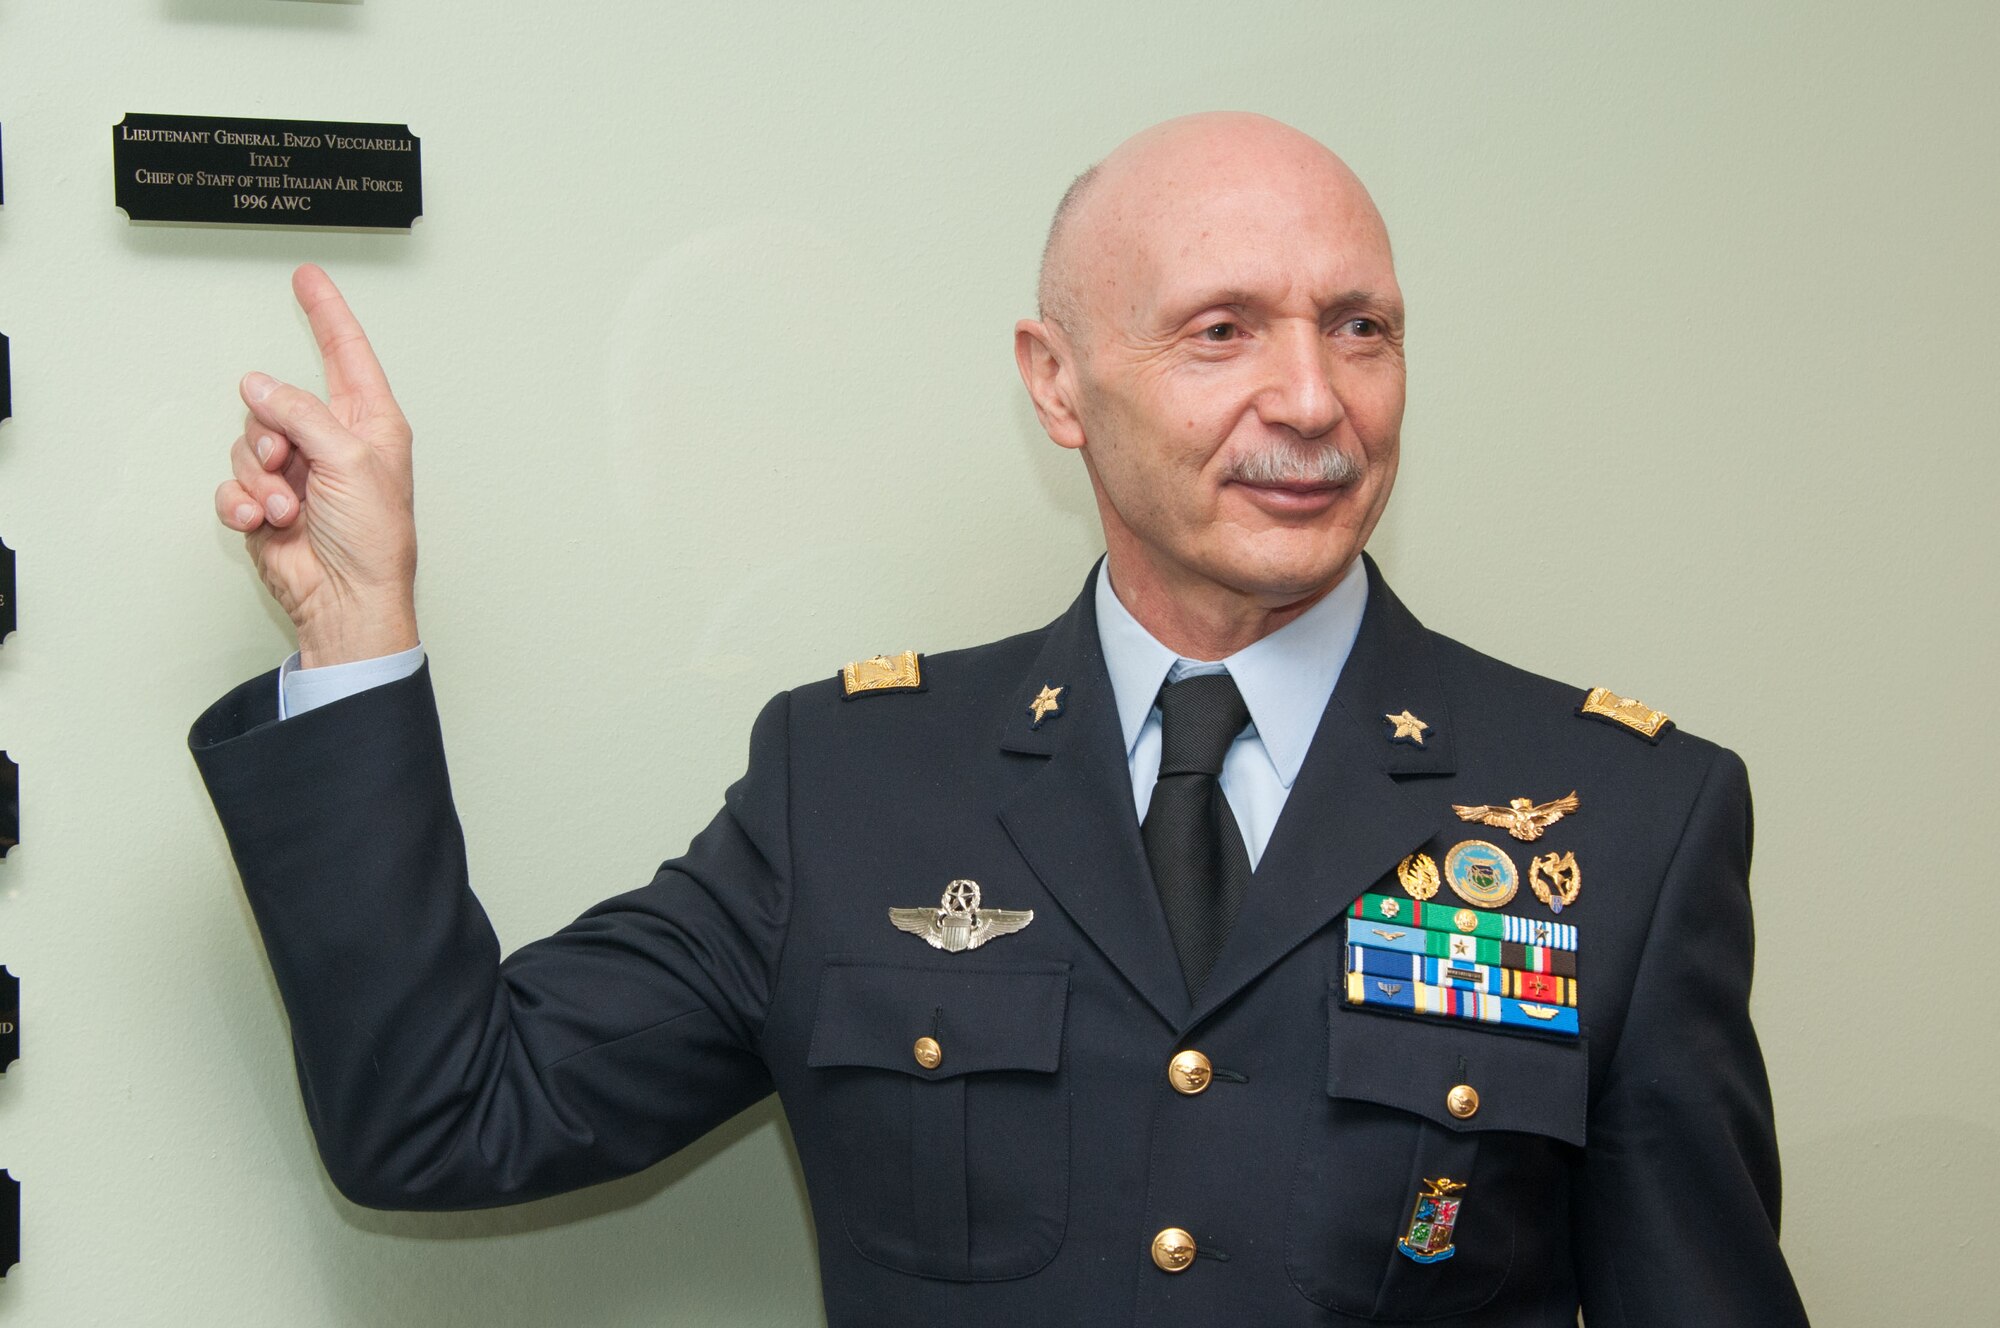 Lt. Gen. Enzo Vecciarelli, Chief of Staff of the Italian Air Force, points to his name on the International Officer Honor Roll wall on Maxwell Air Force Base, Ala., Feb. 10, 2017. Vecciarelli is one of more than 400 officers from 97 countries who have been inducted as of 2017. (US Air Force photo by Bud Hancock)